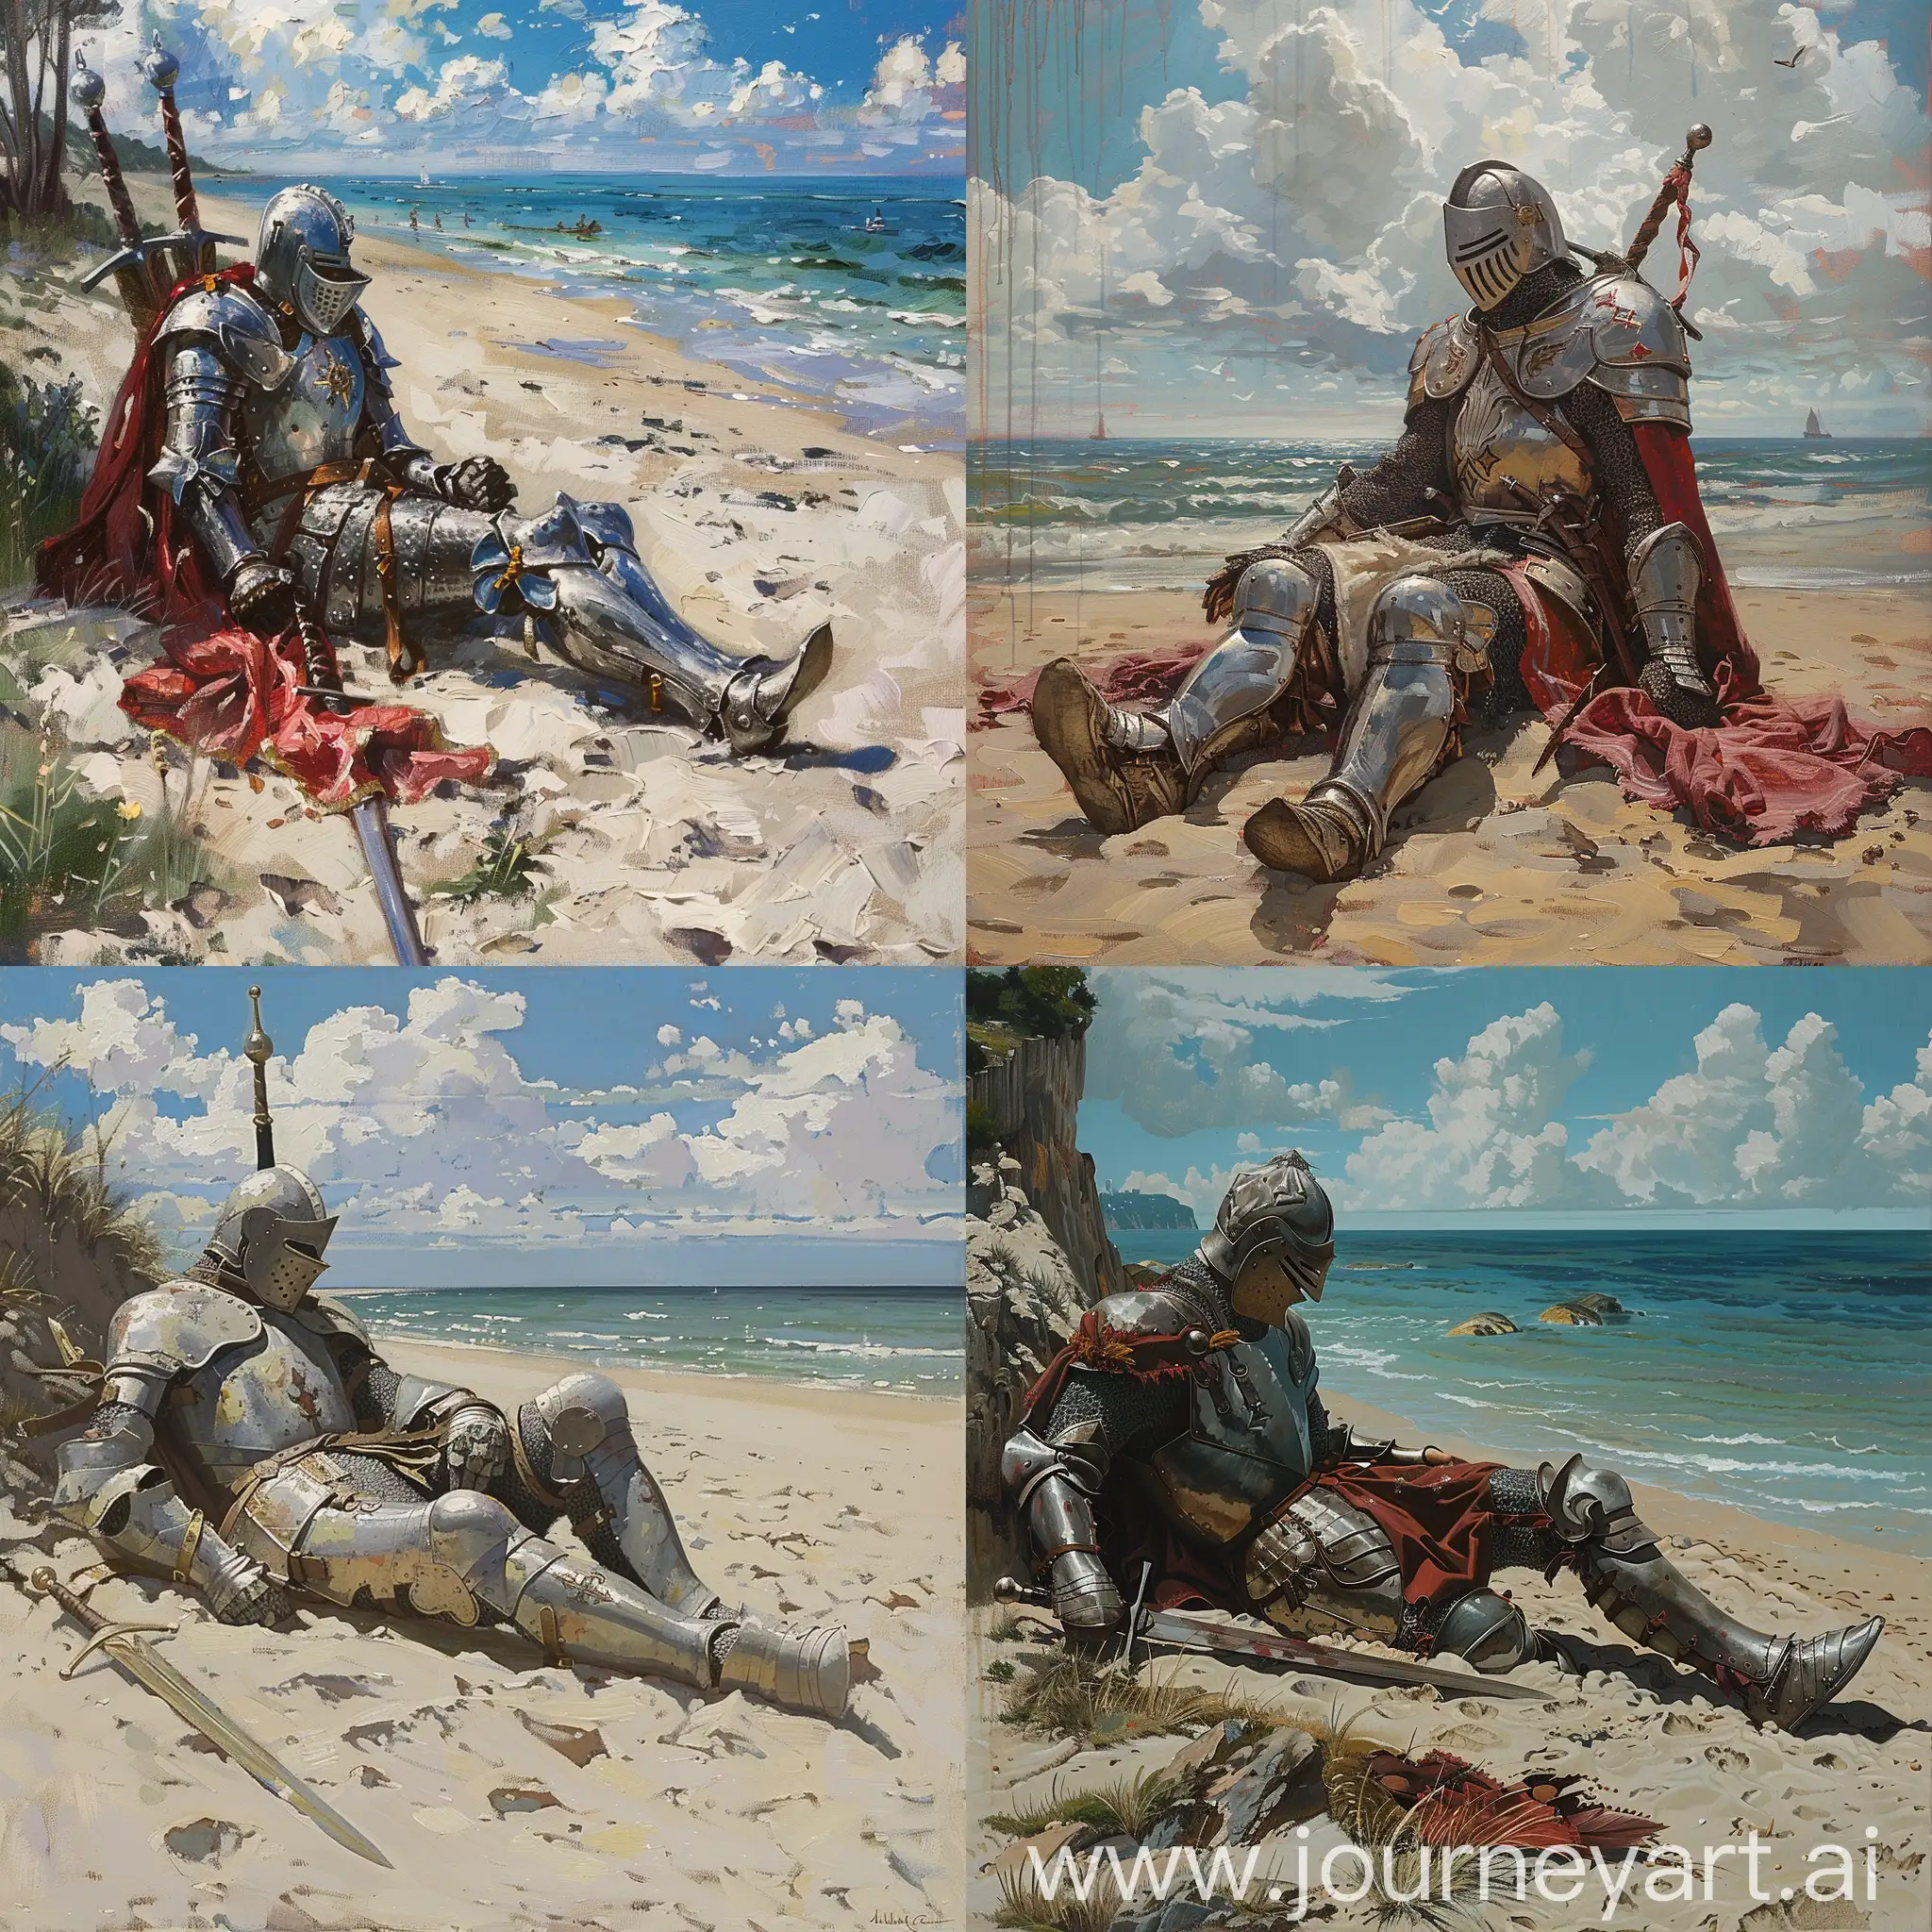 Knight-Resting-on-the-Beach-at-Sunset